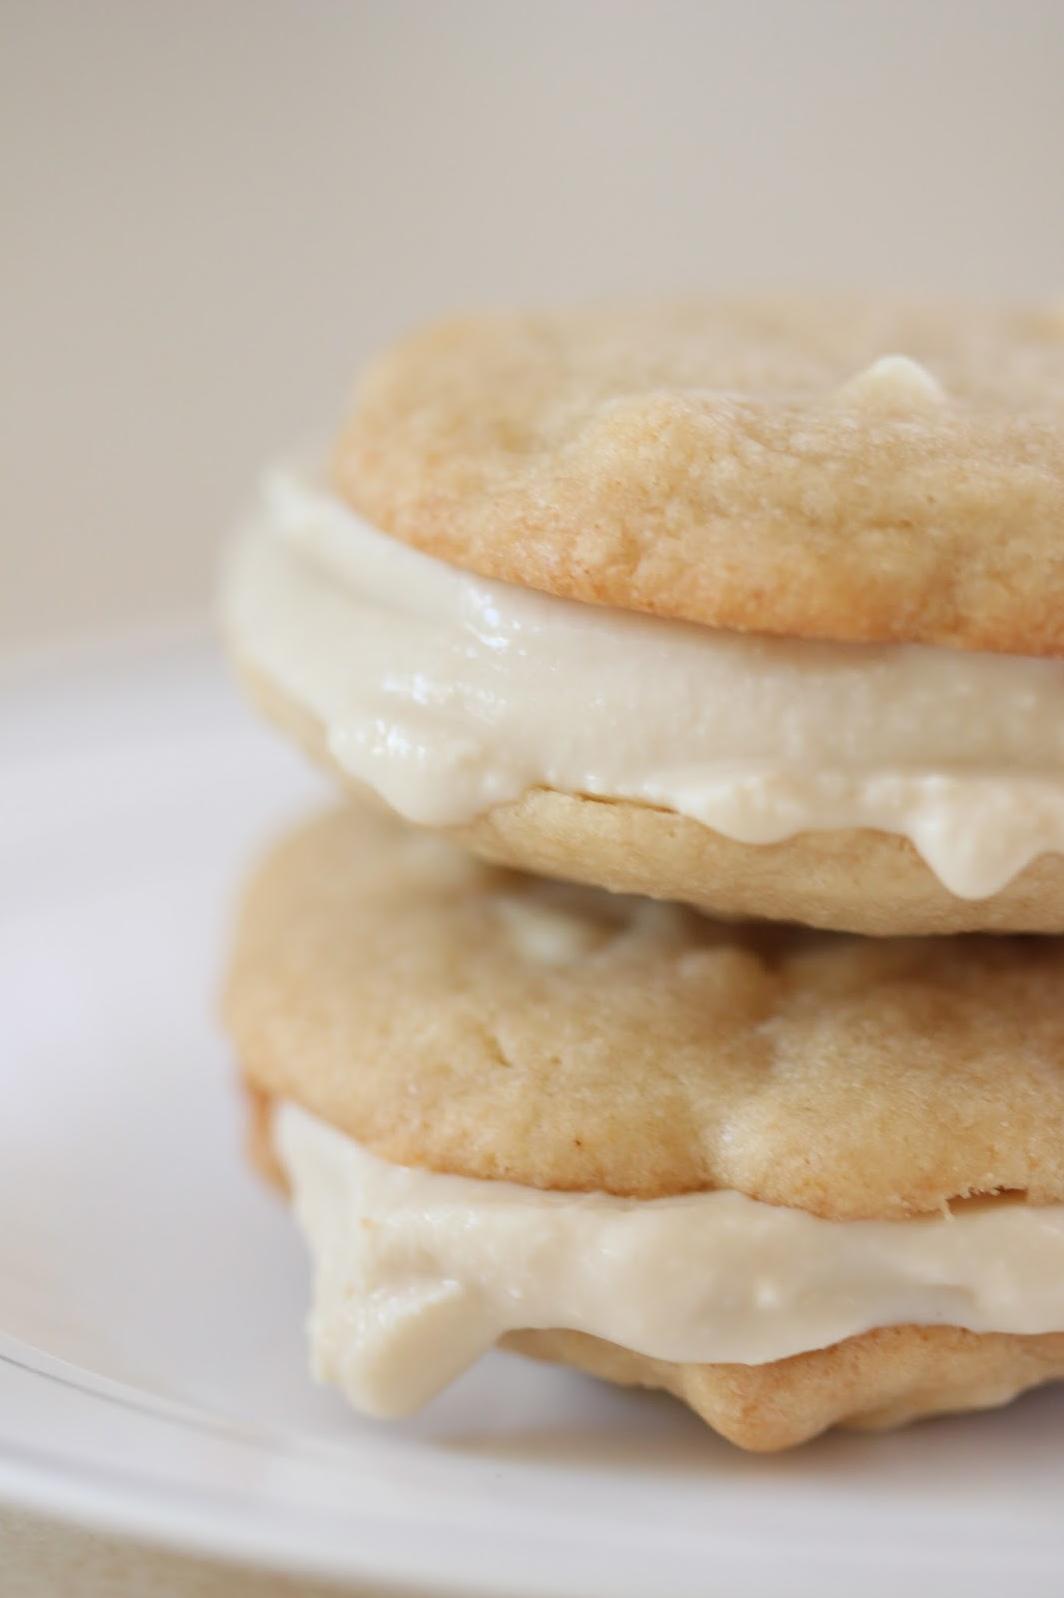  Bite into a little bit of heaven with our delectable Irish Cream Sandwiches.